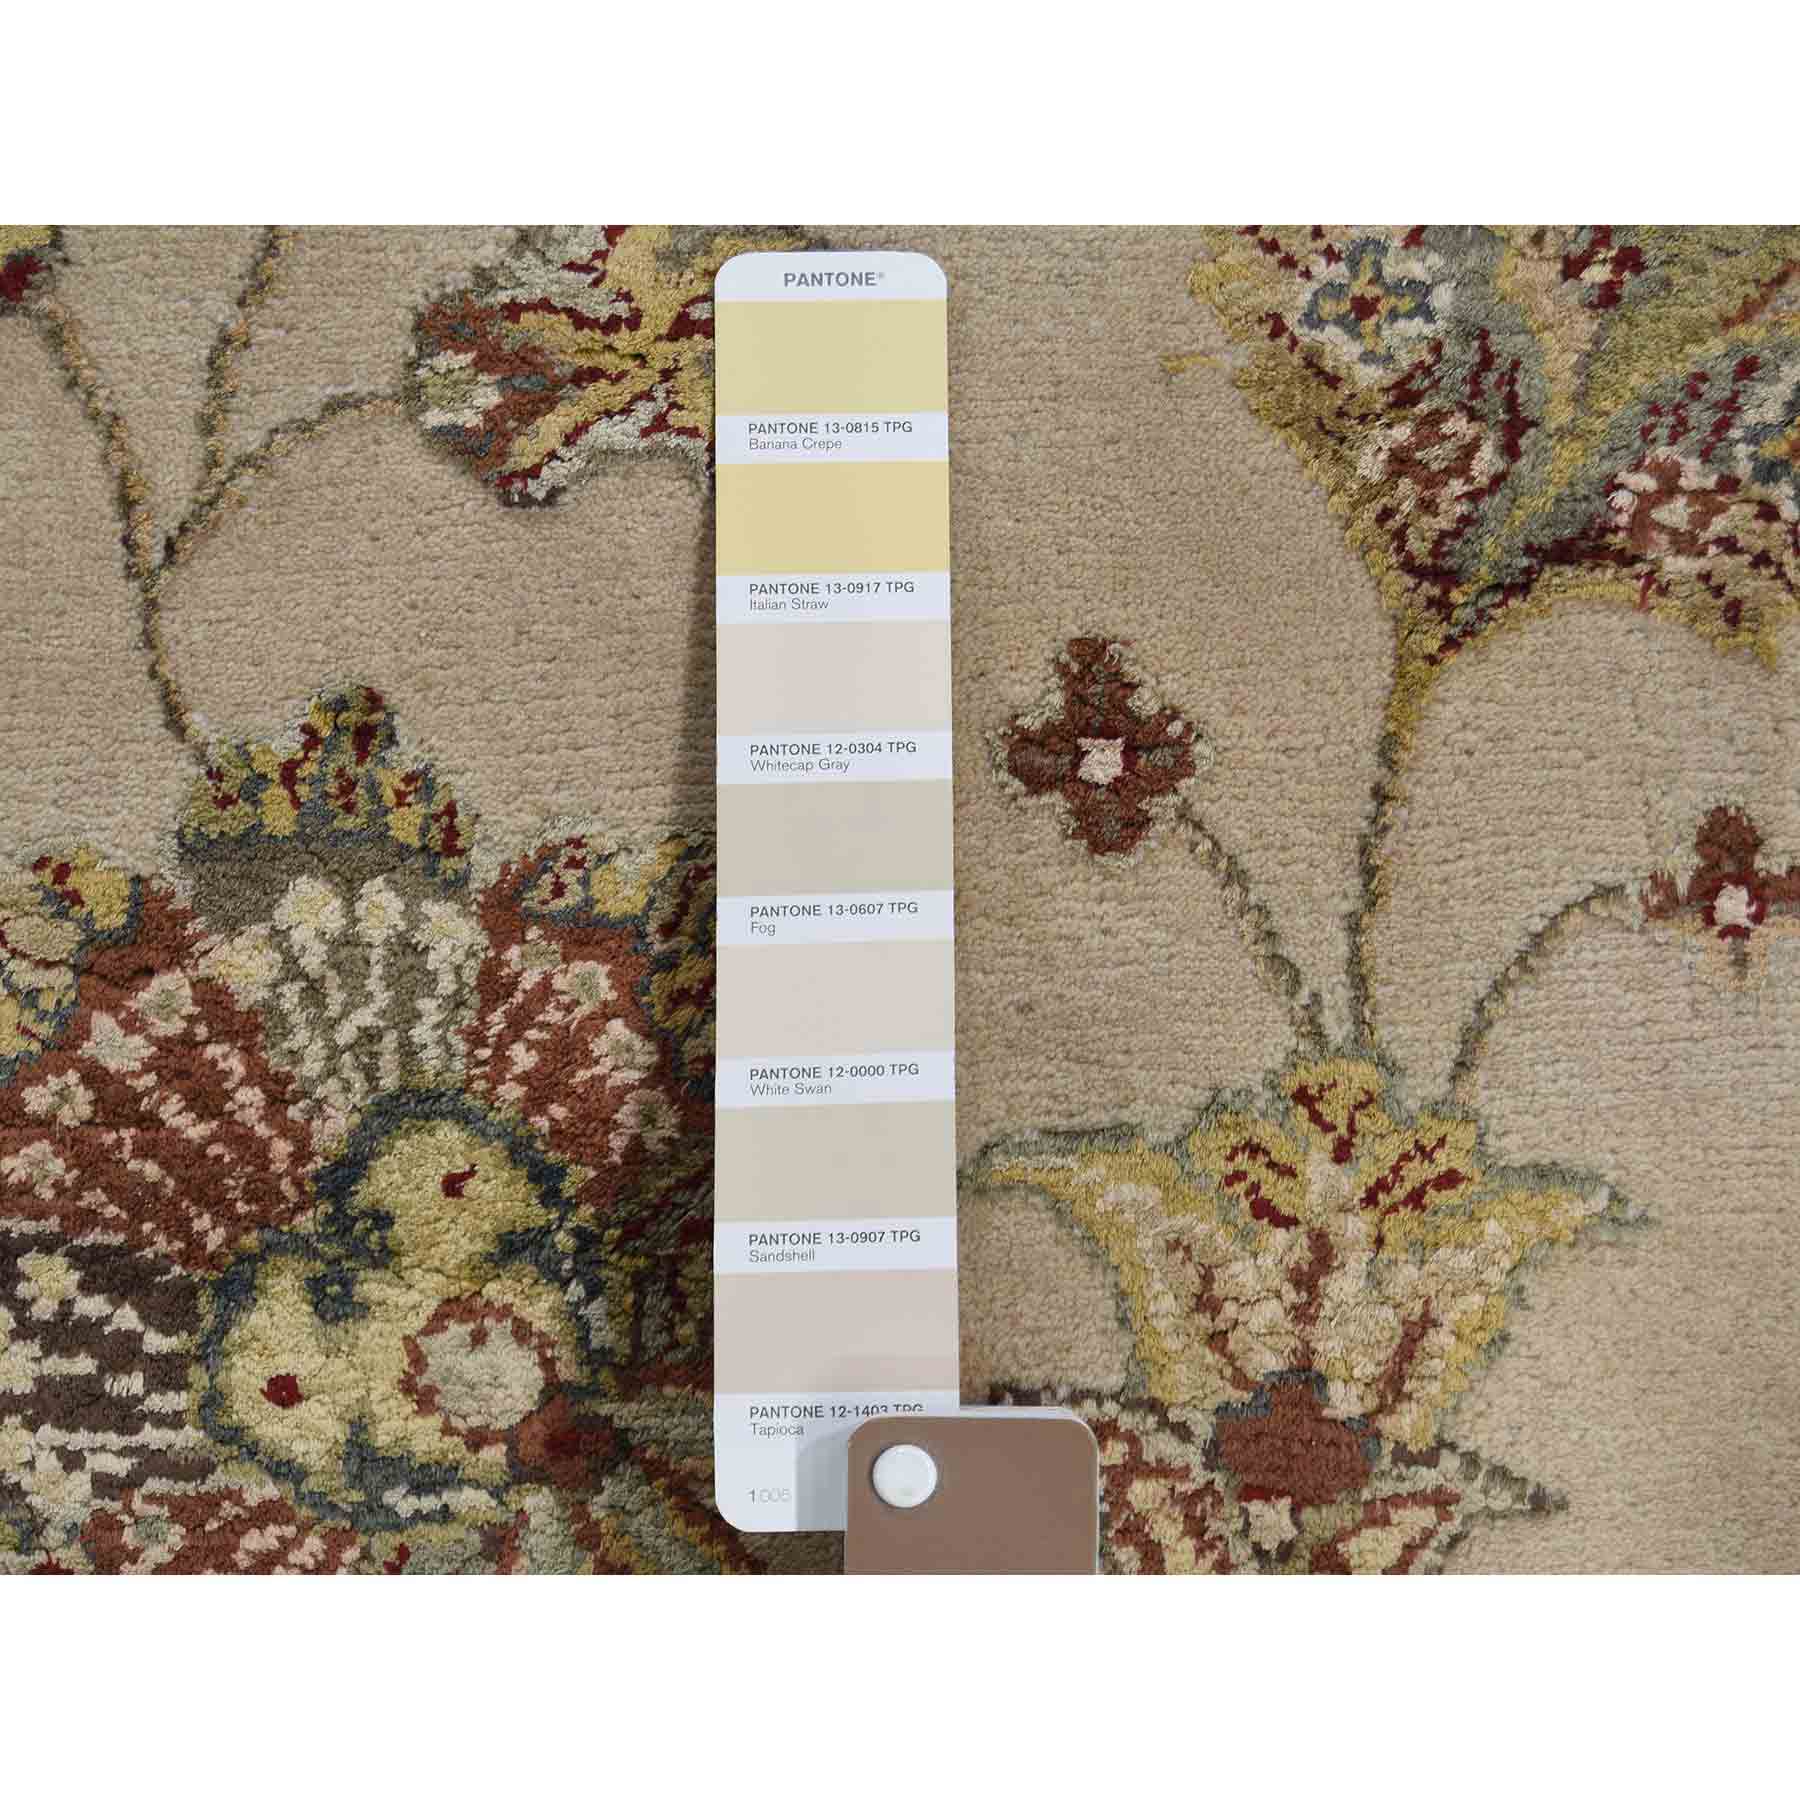 Rajasthan-Hand-Knotted-Rug-228795